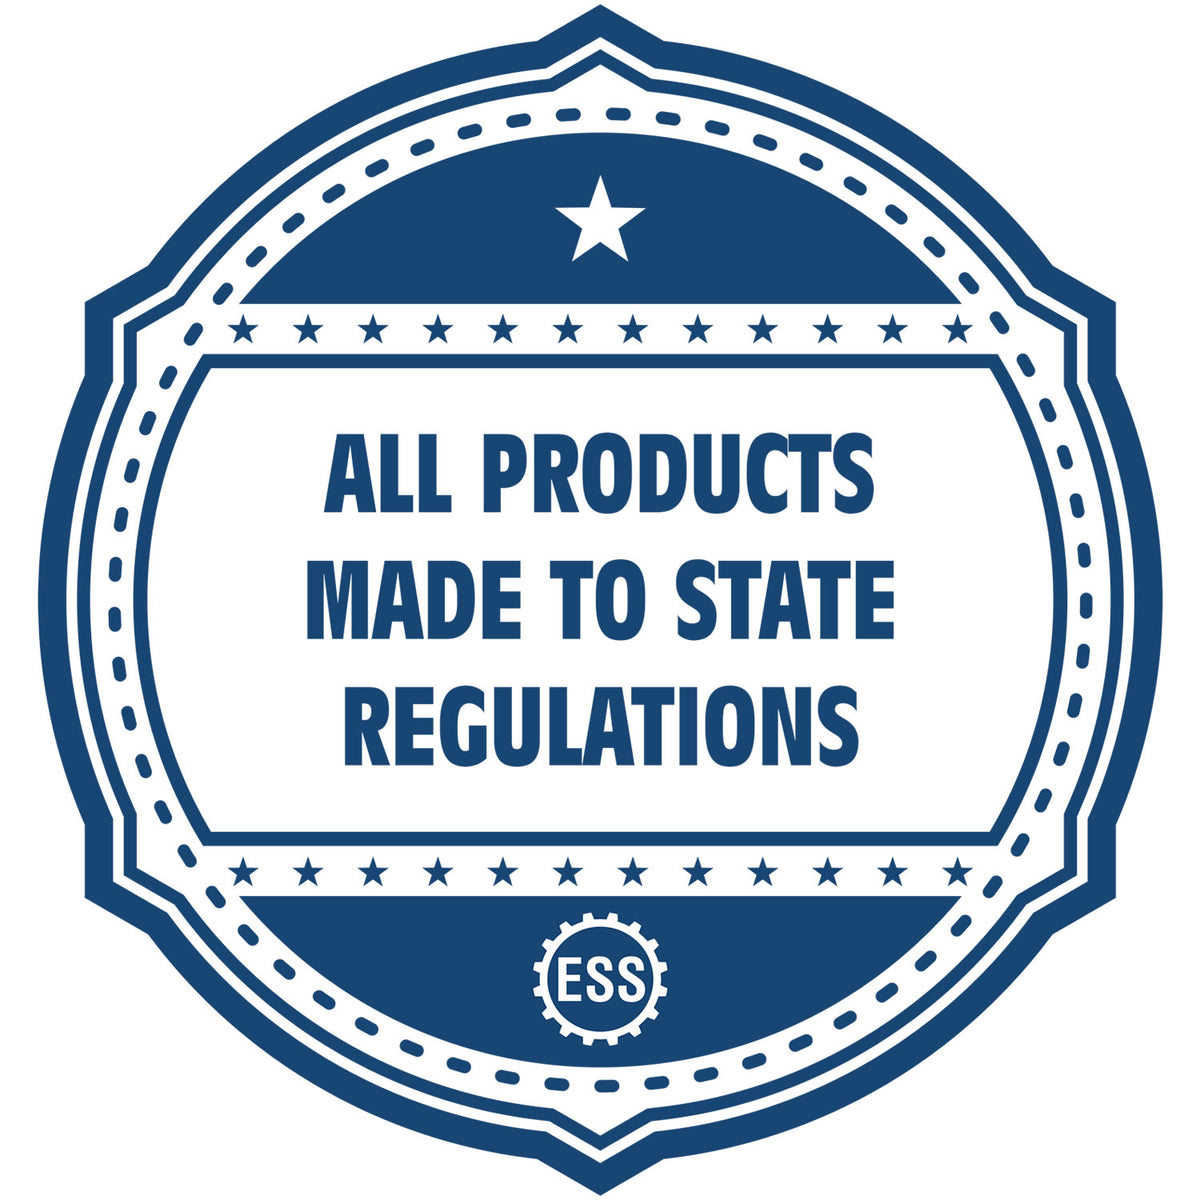 An icon or badge element for the Premium MaxLight Pre-Inked Oklahoma Engineering Stamp showing that this product is made in compliance with state regulations.